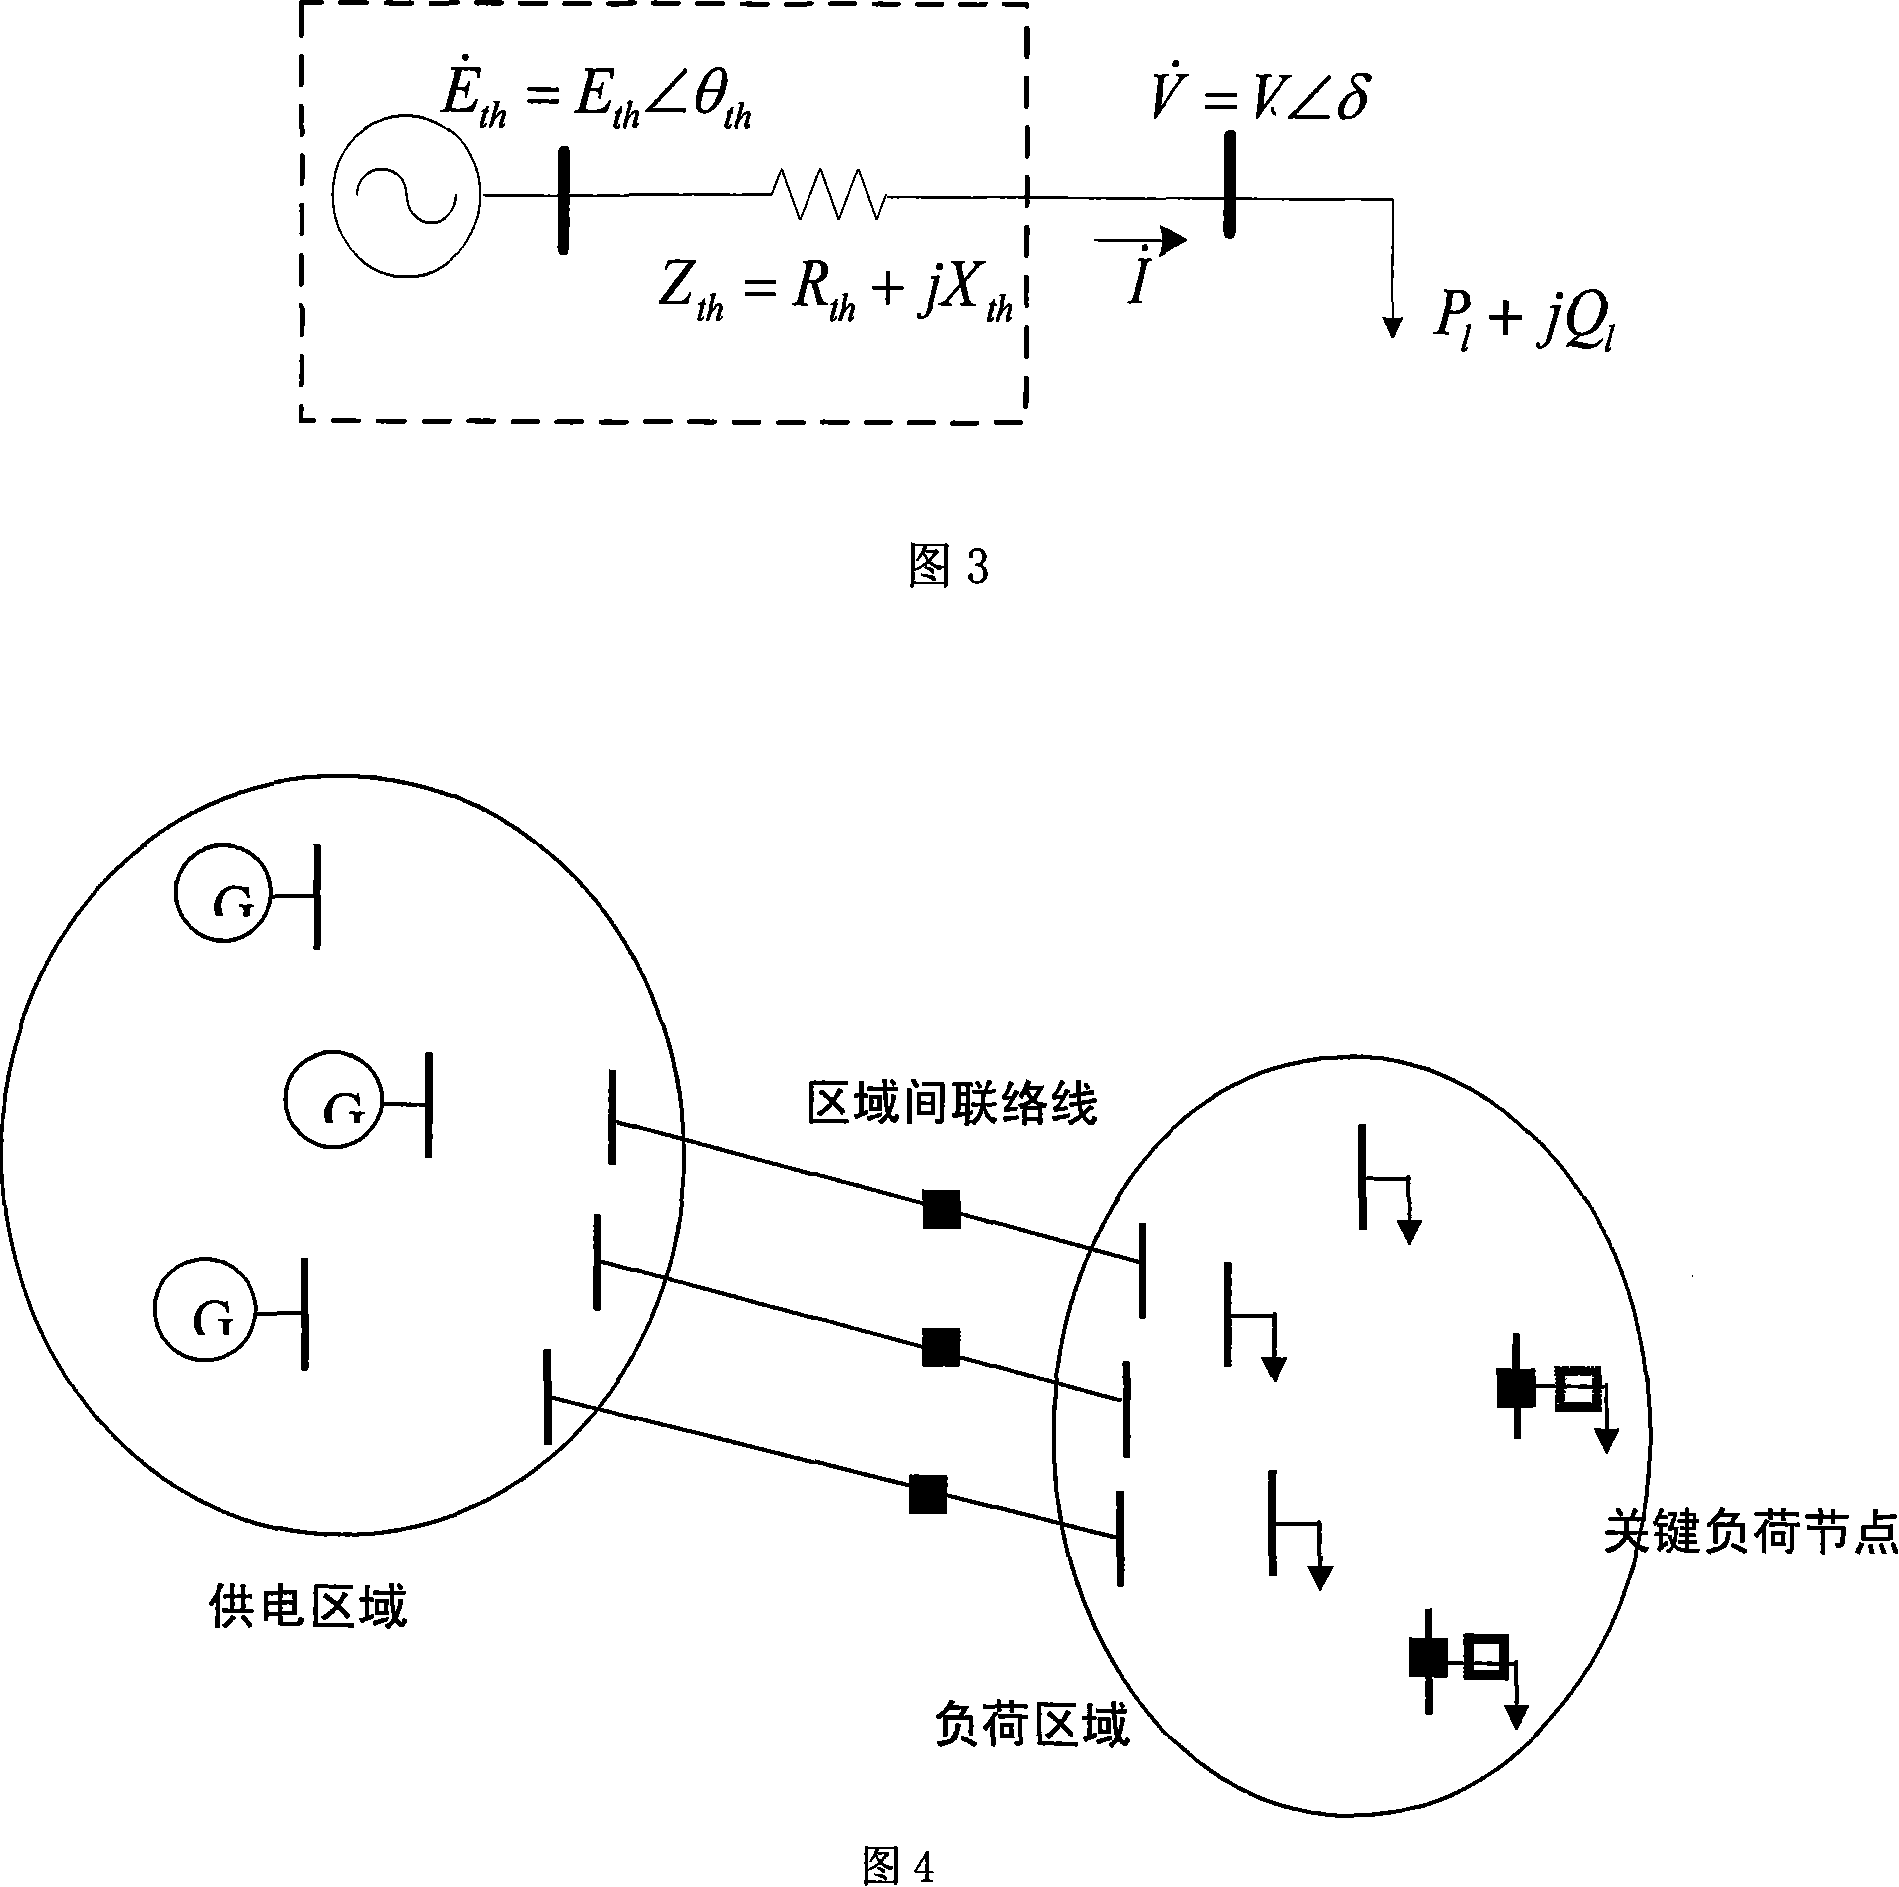 Area voltage stability monitoring method based on synchronous phasor measurement